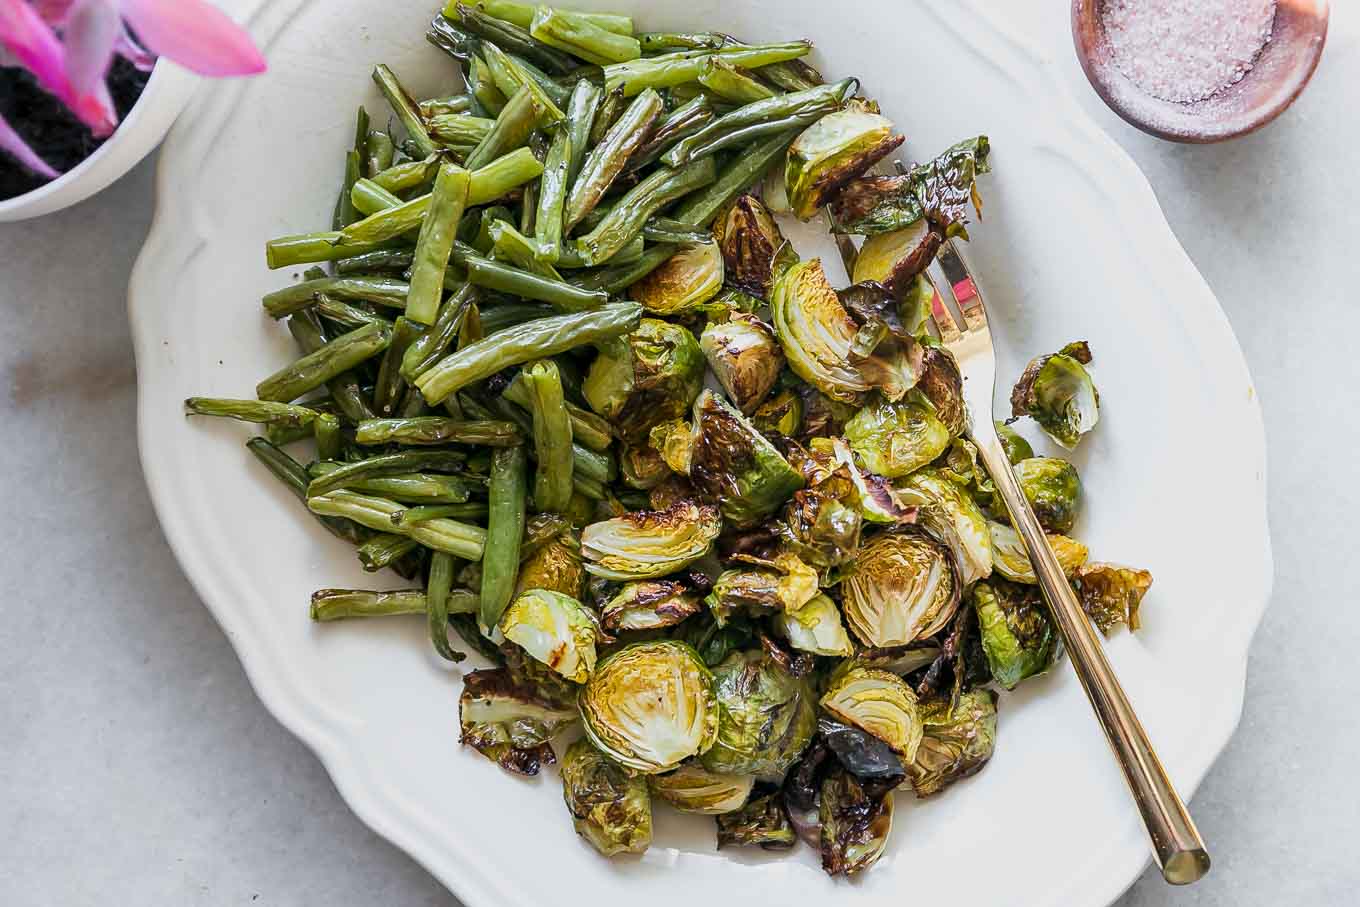 baked green beans and brussels sprouts on a white side dish